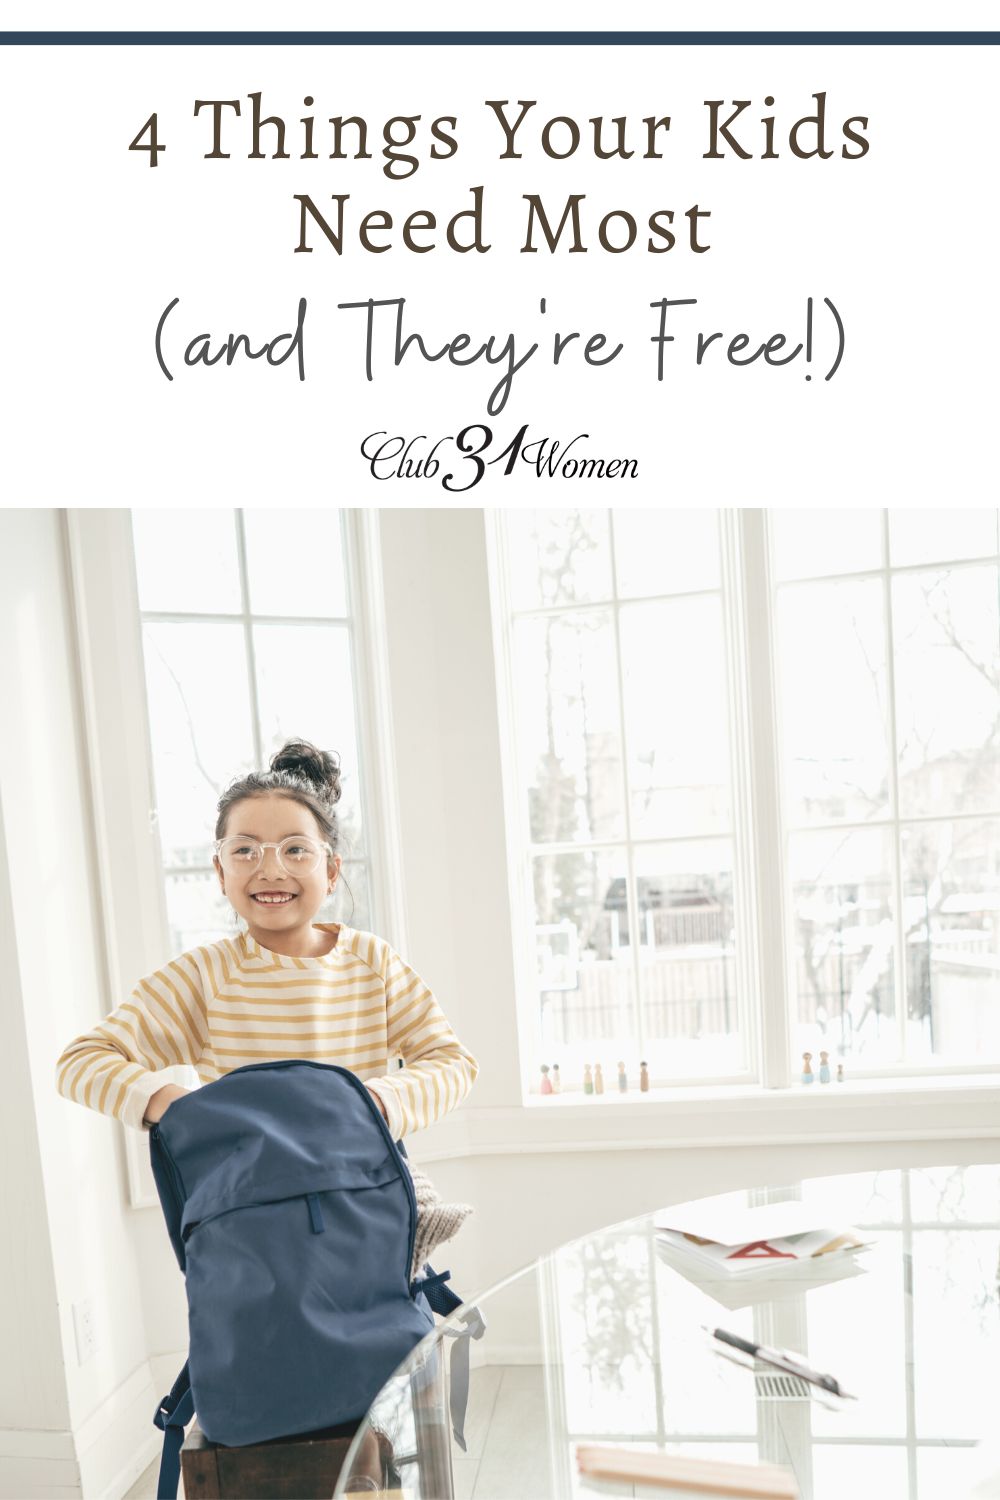 4 Things Your Kids Need Most (and they’re free!) via @Club31Women